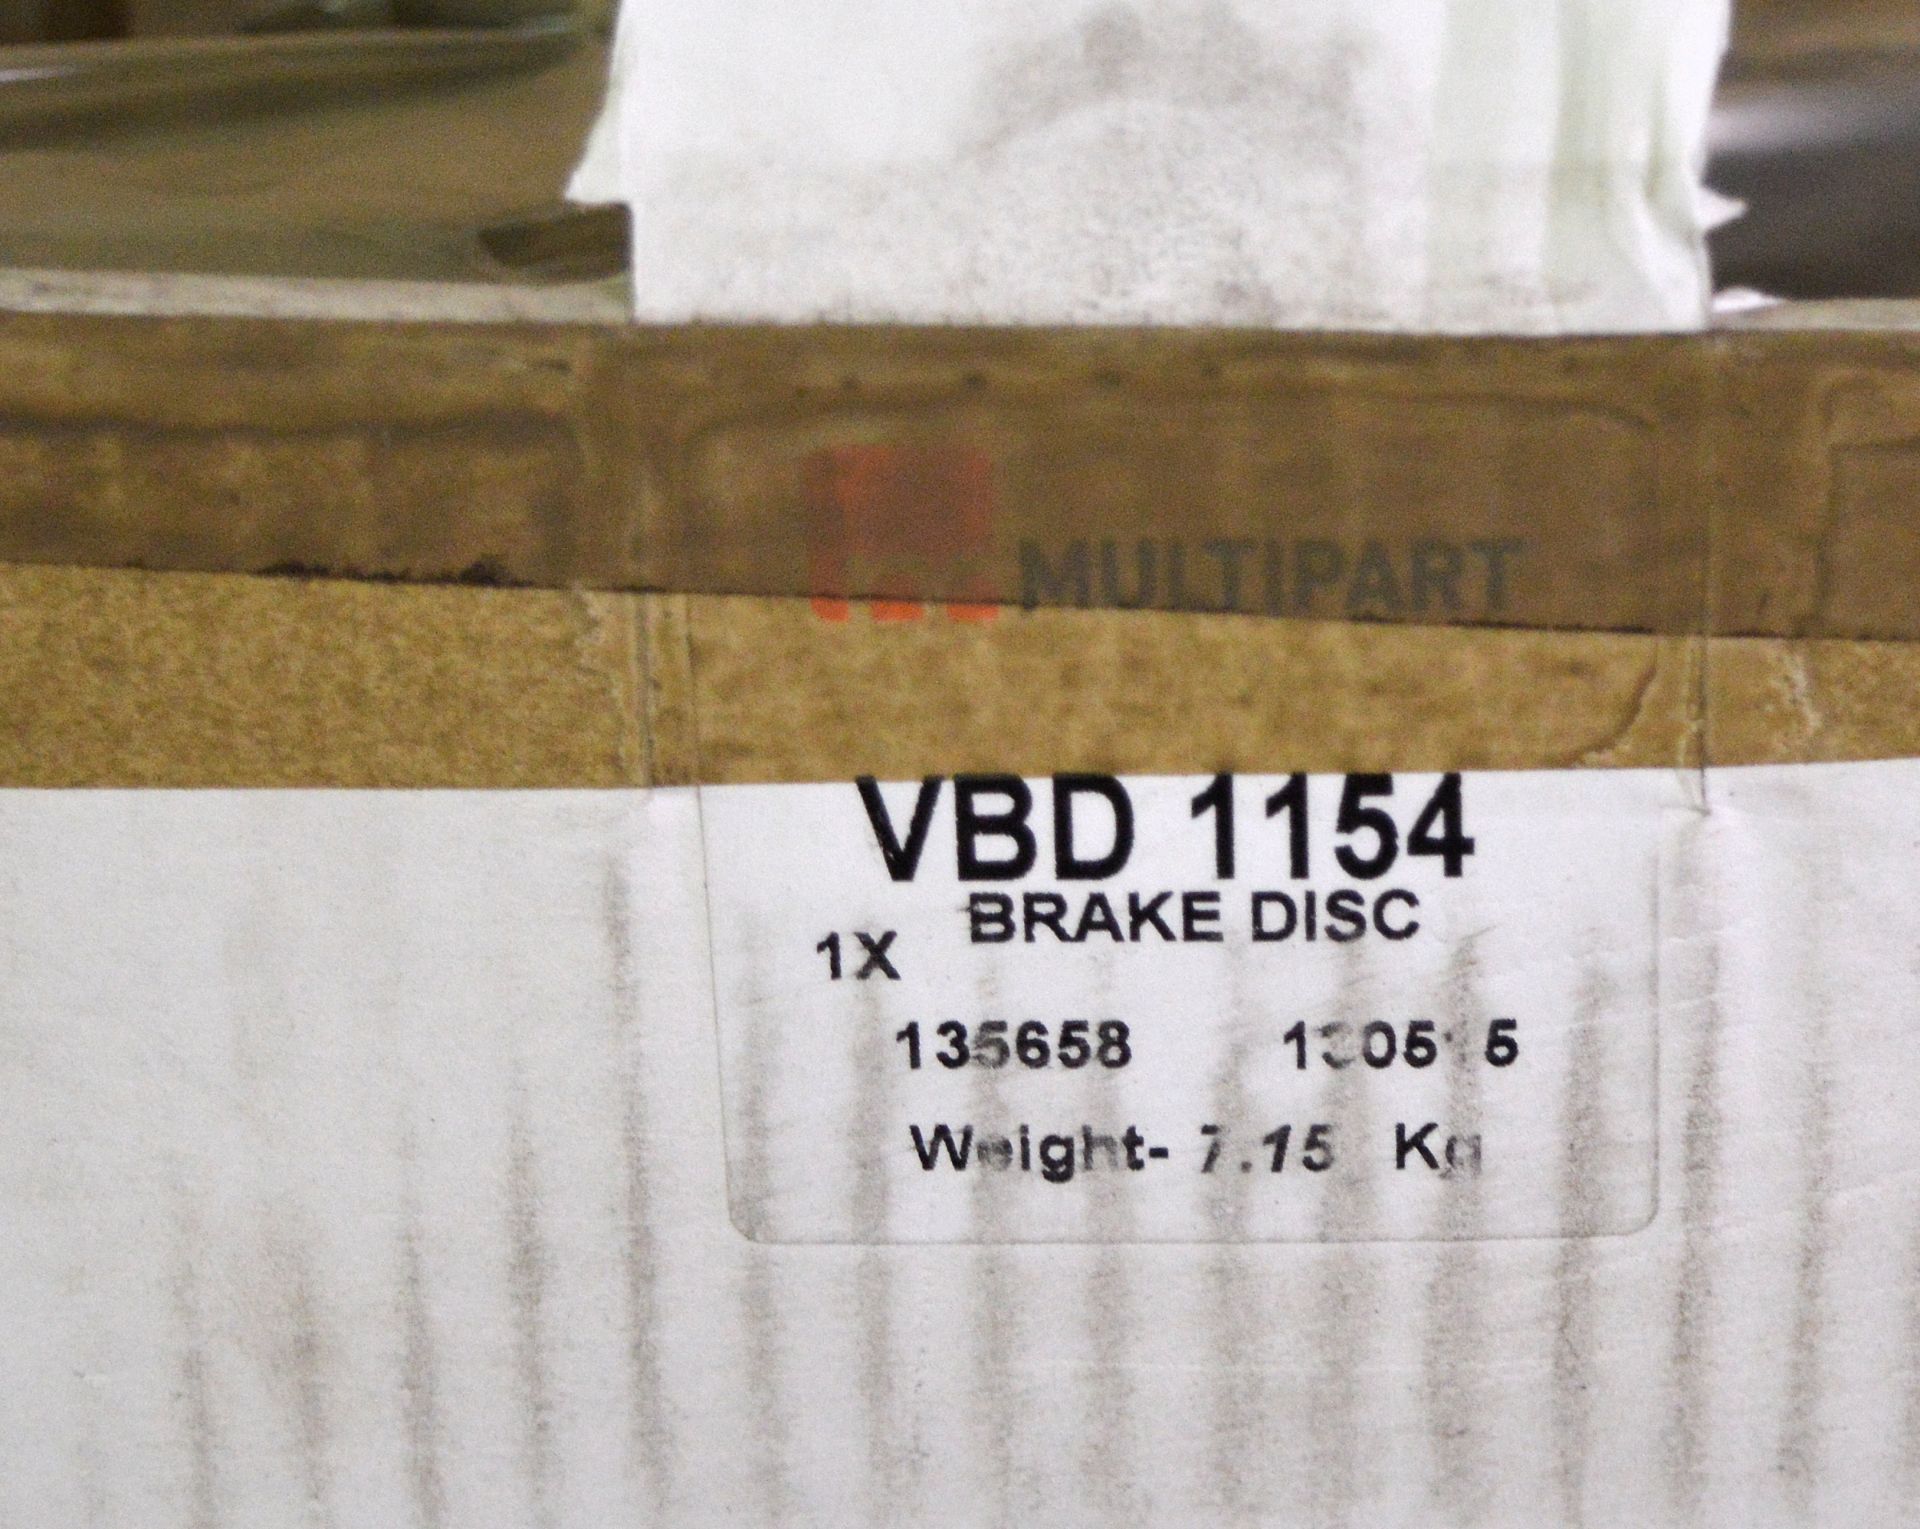 Vehicle parts - brake discs front, pad sets, brake shoes, CV joints, front coil springs - see pics. - Image 3 of 8